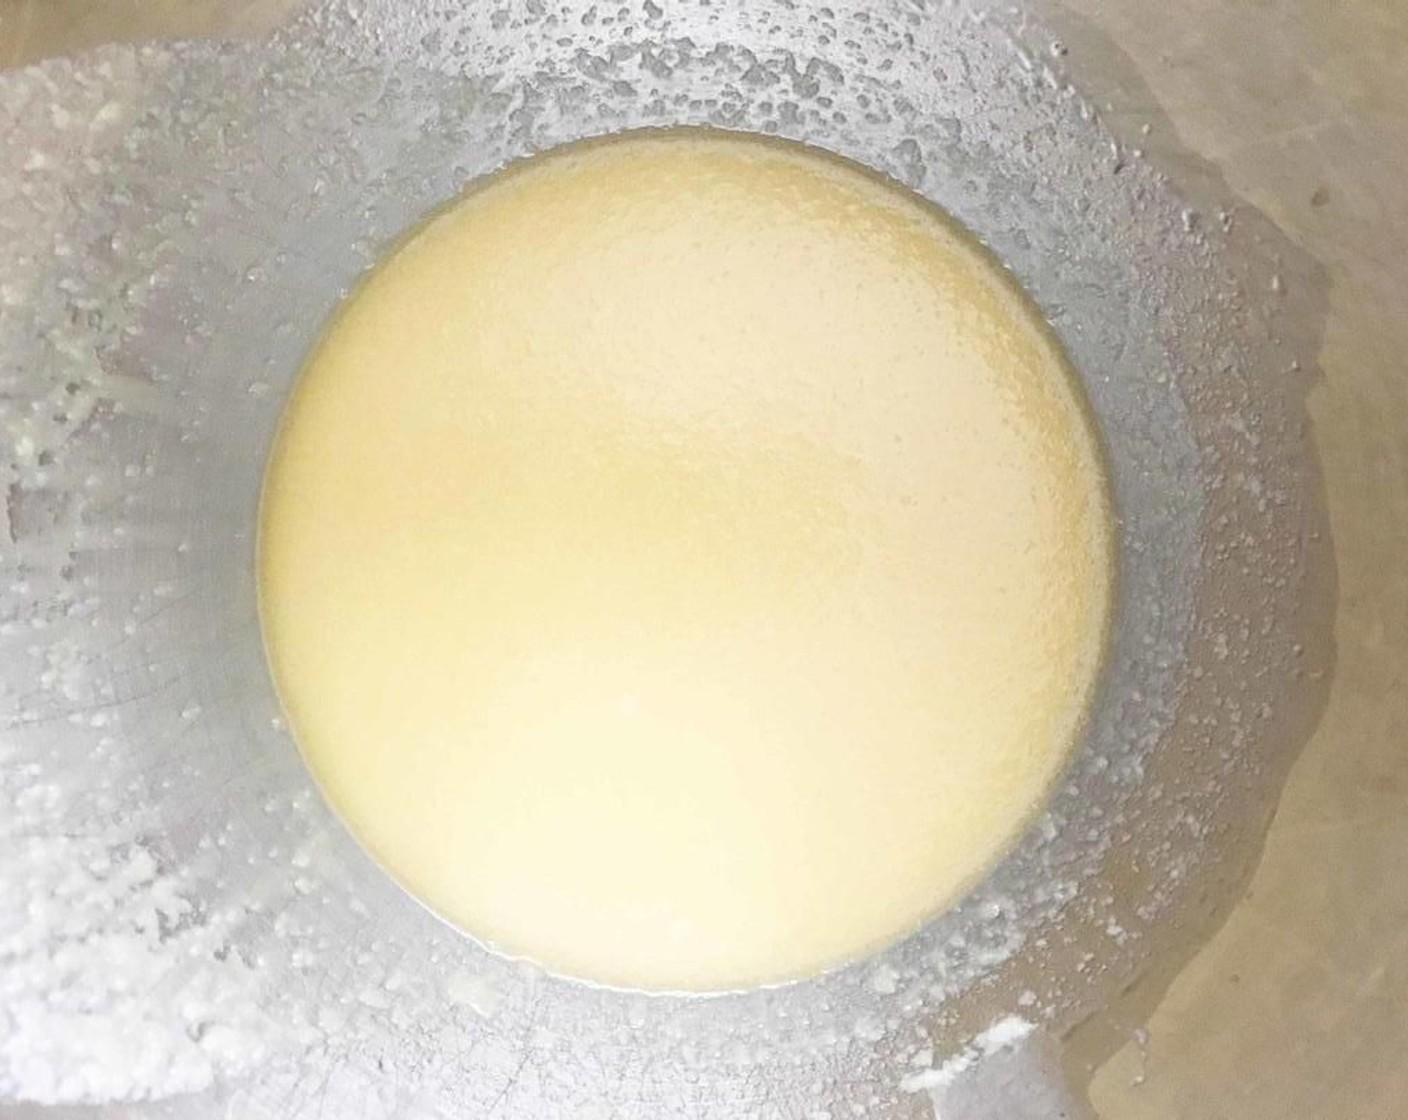 step 2 In a large bowl, beat together the Farmhouse Eggs® Large Brown Eggs (5), Butter (1 cup), Natural Sweetener (1/3 cup) and Vanilla Extract (1/2 Tbsp) until well combined.